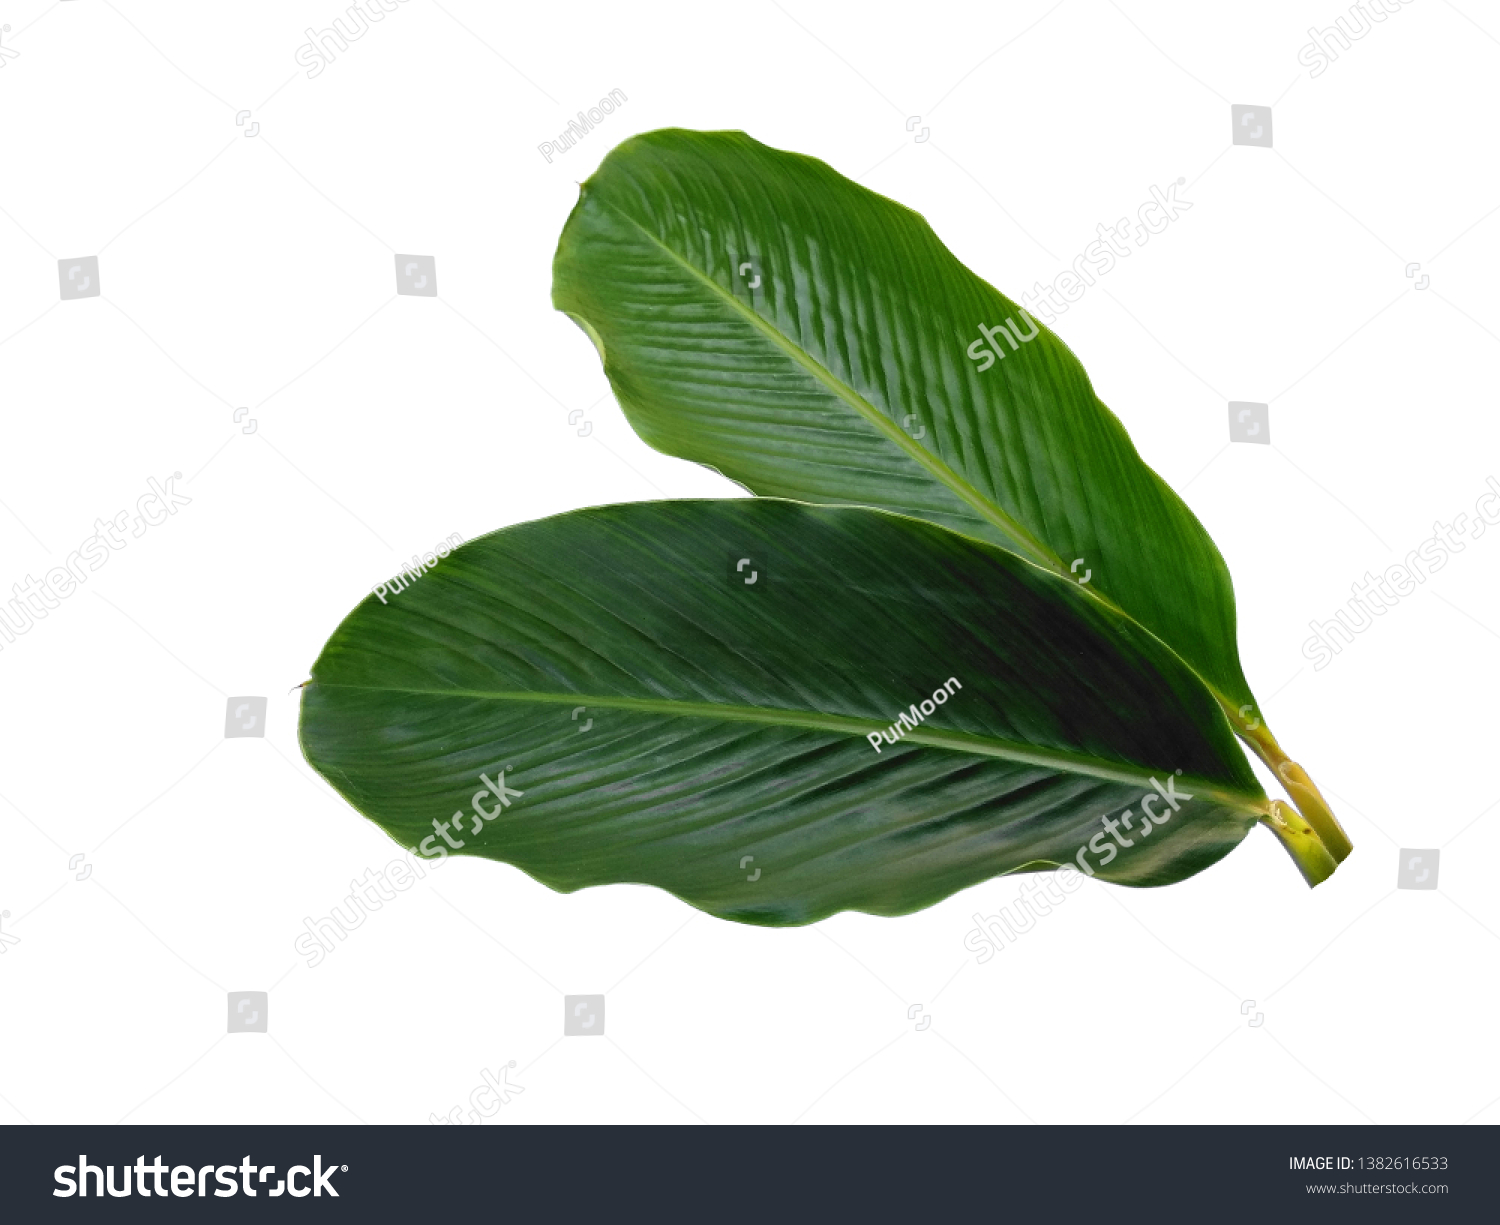 Green leaf isolated on white background. Red Ginger leaves or Alpinia purpurata leaf on white background. #1382616533